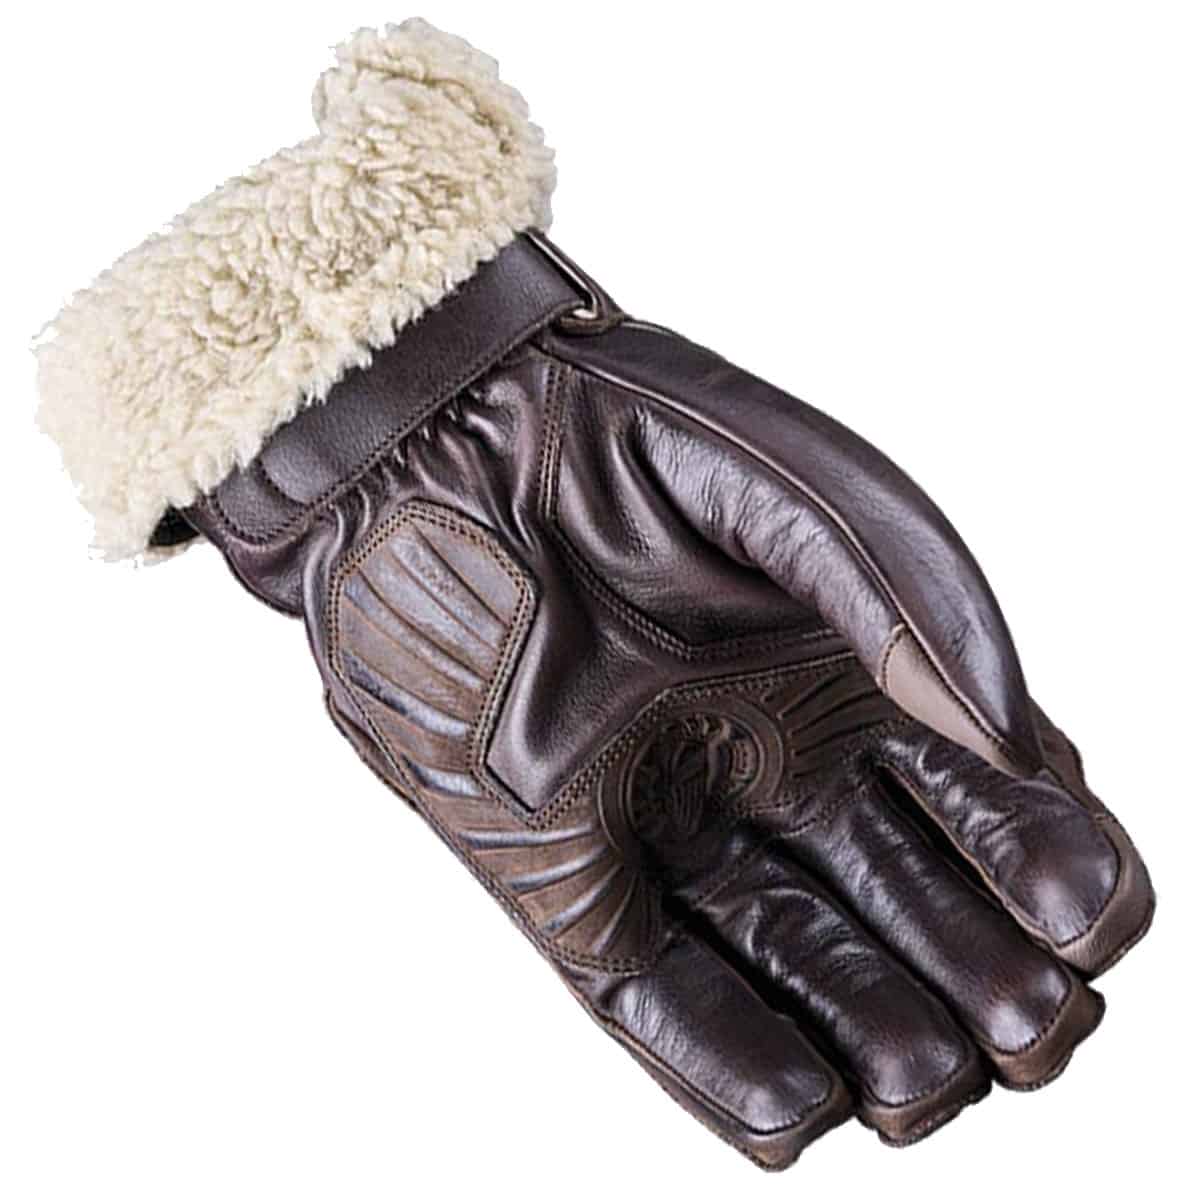 Five Montana gloves: The motorcycle-gloves-equivalent of an Ugg boot palm